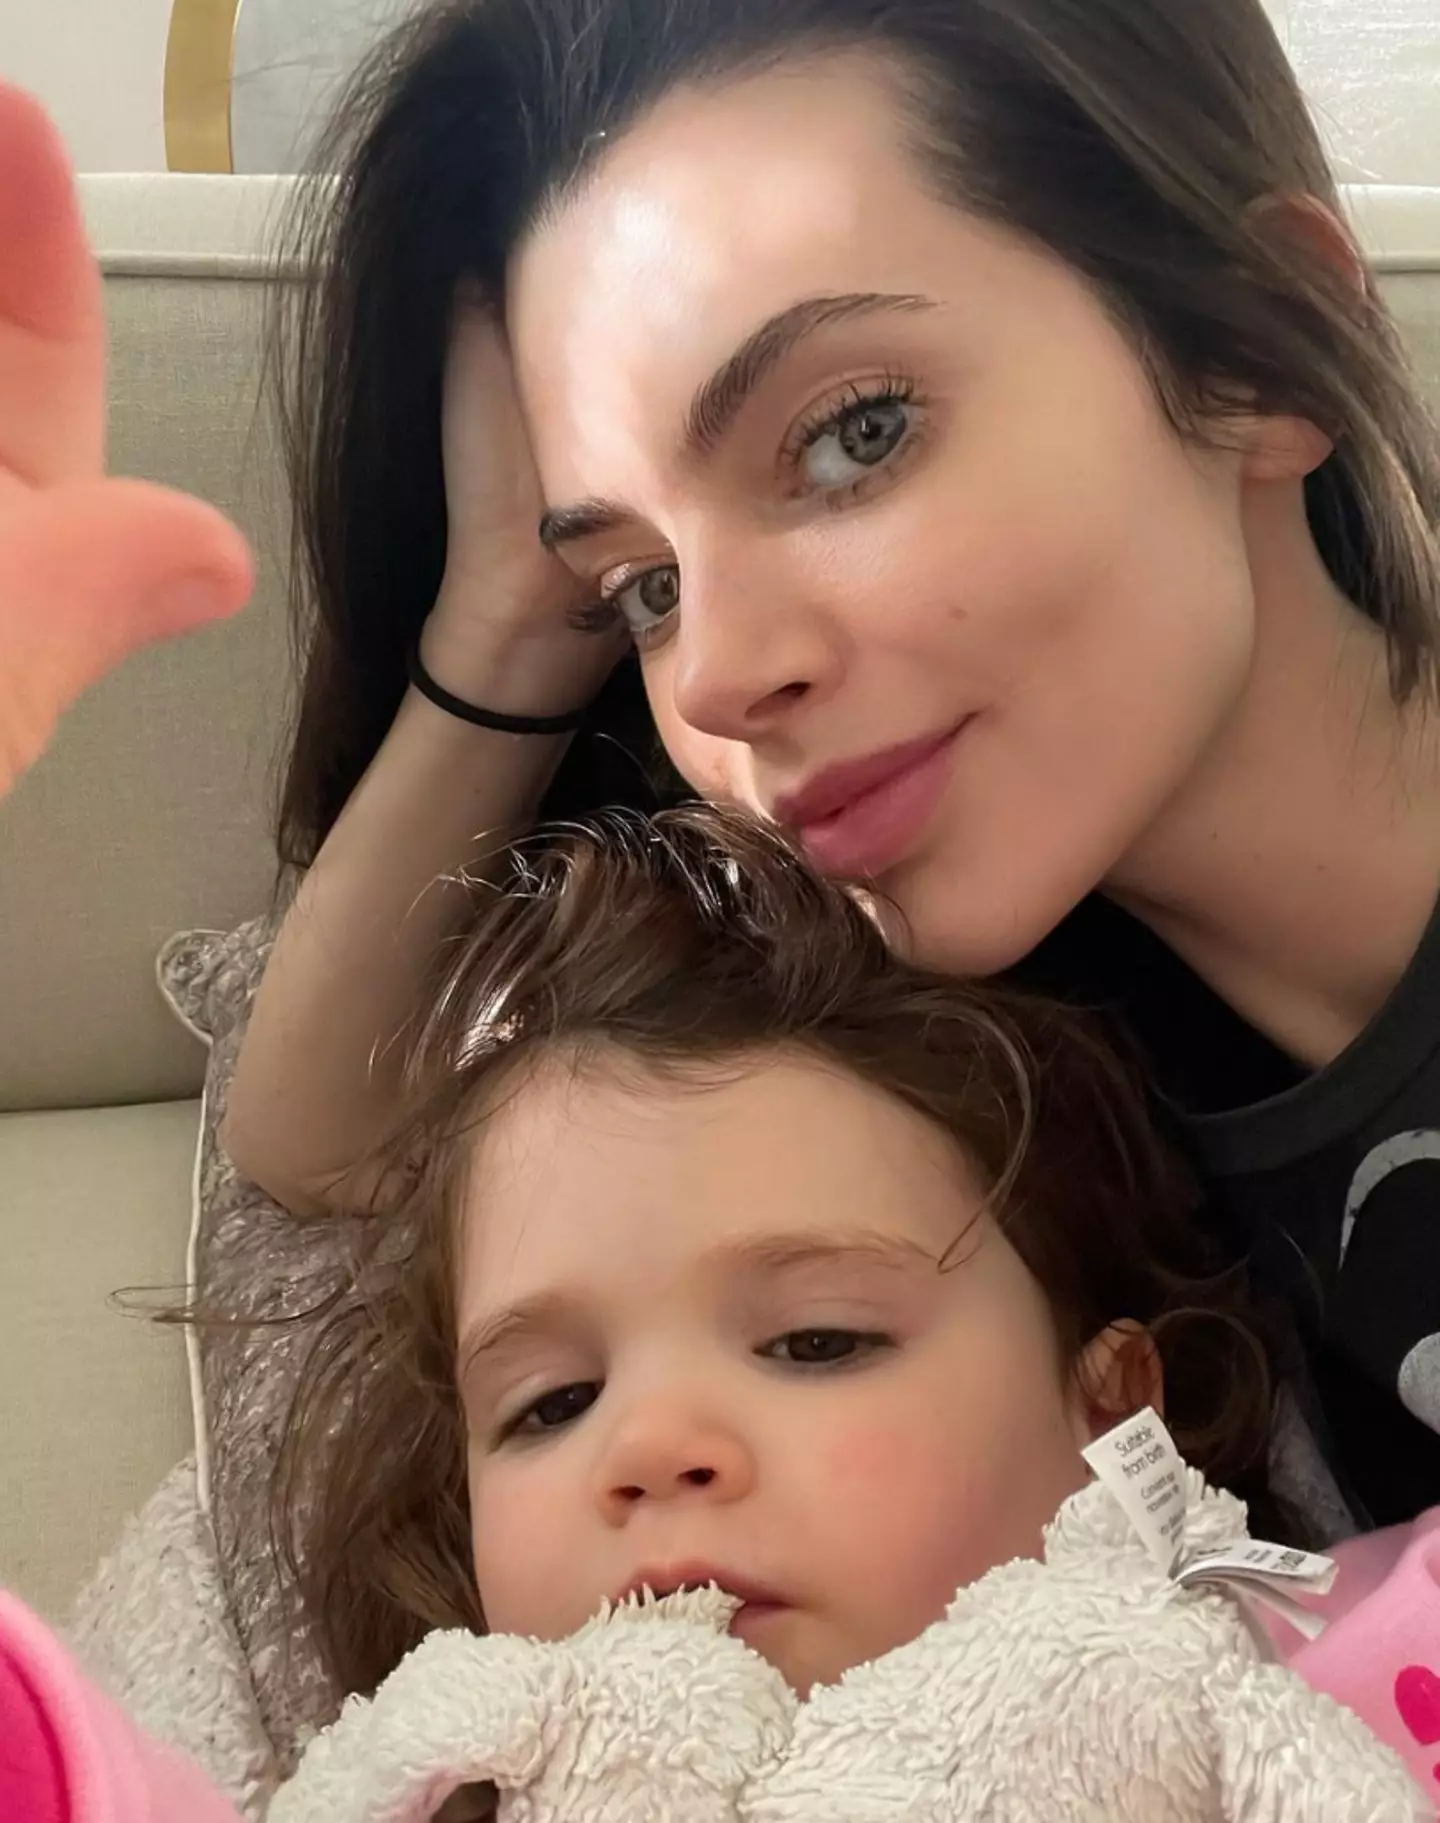 Emma Beadle-McVey received 'comments' about her choice of car seat for her daughter, Primrose.